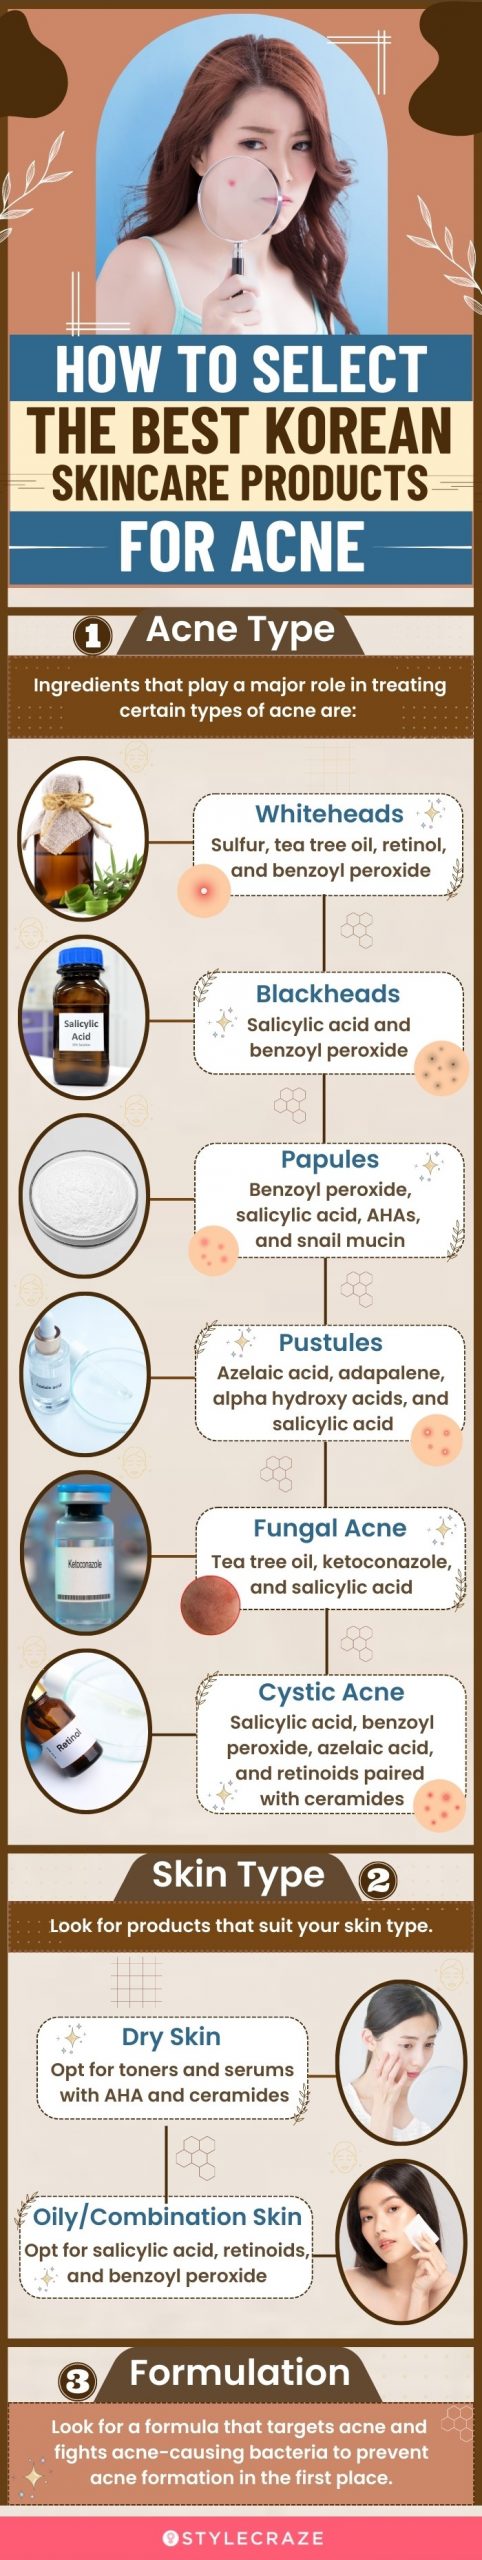 How To Select The Best Korean Skincare Products For Acne (infographic)